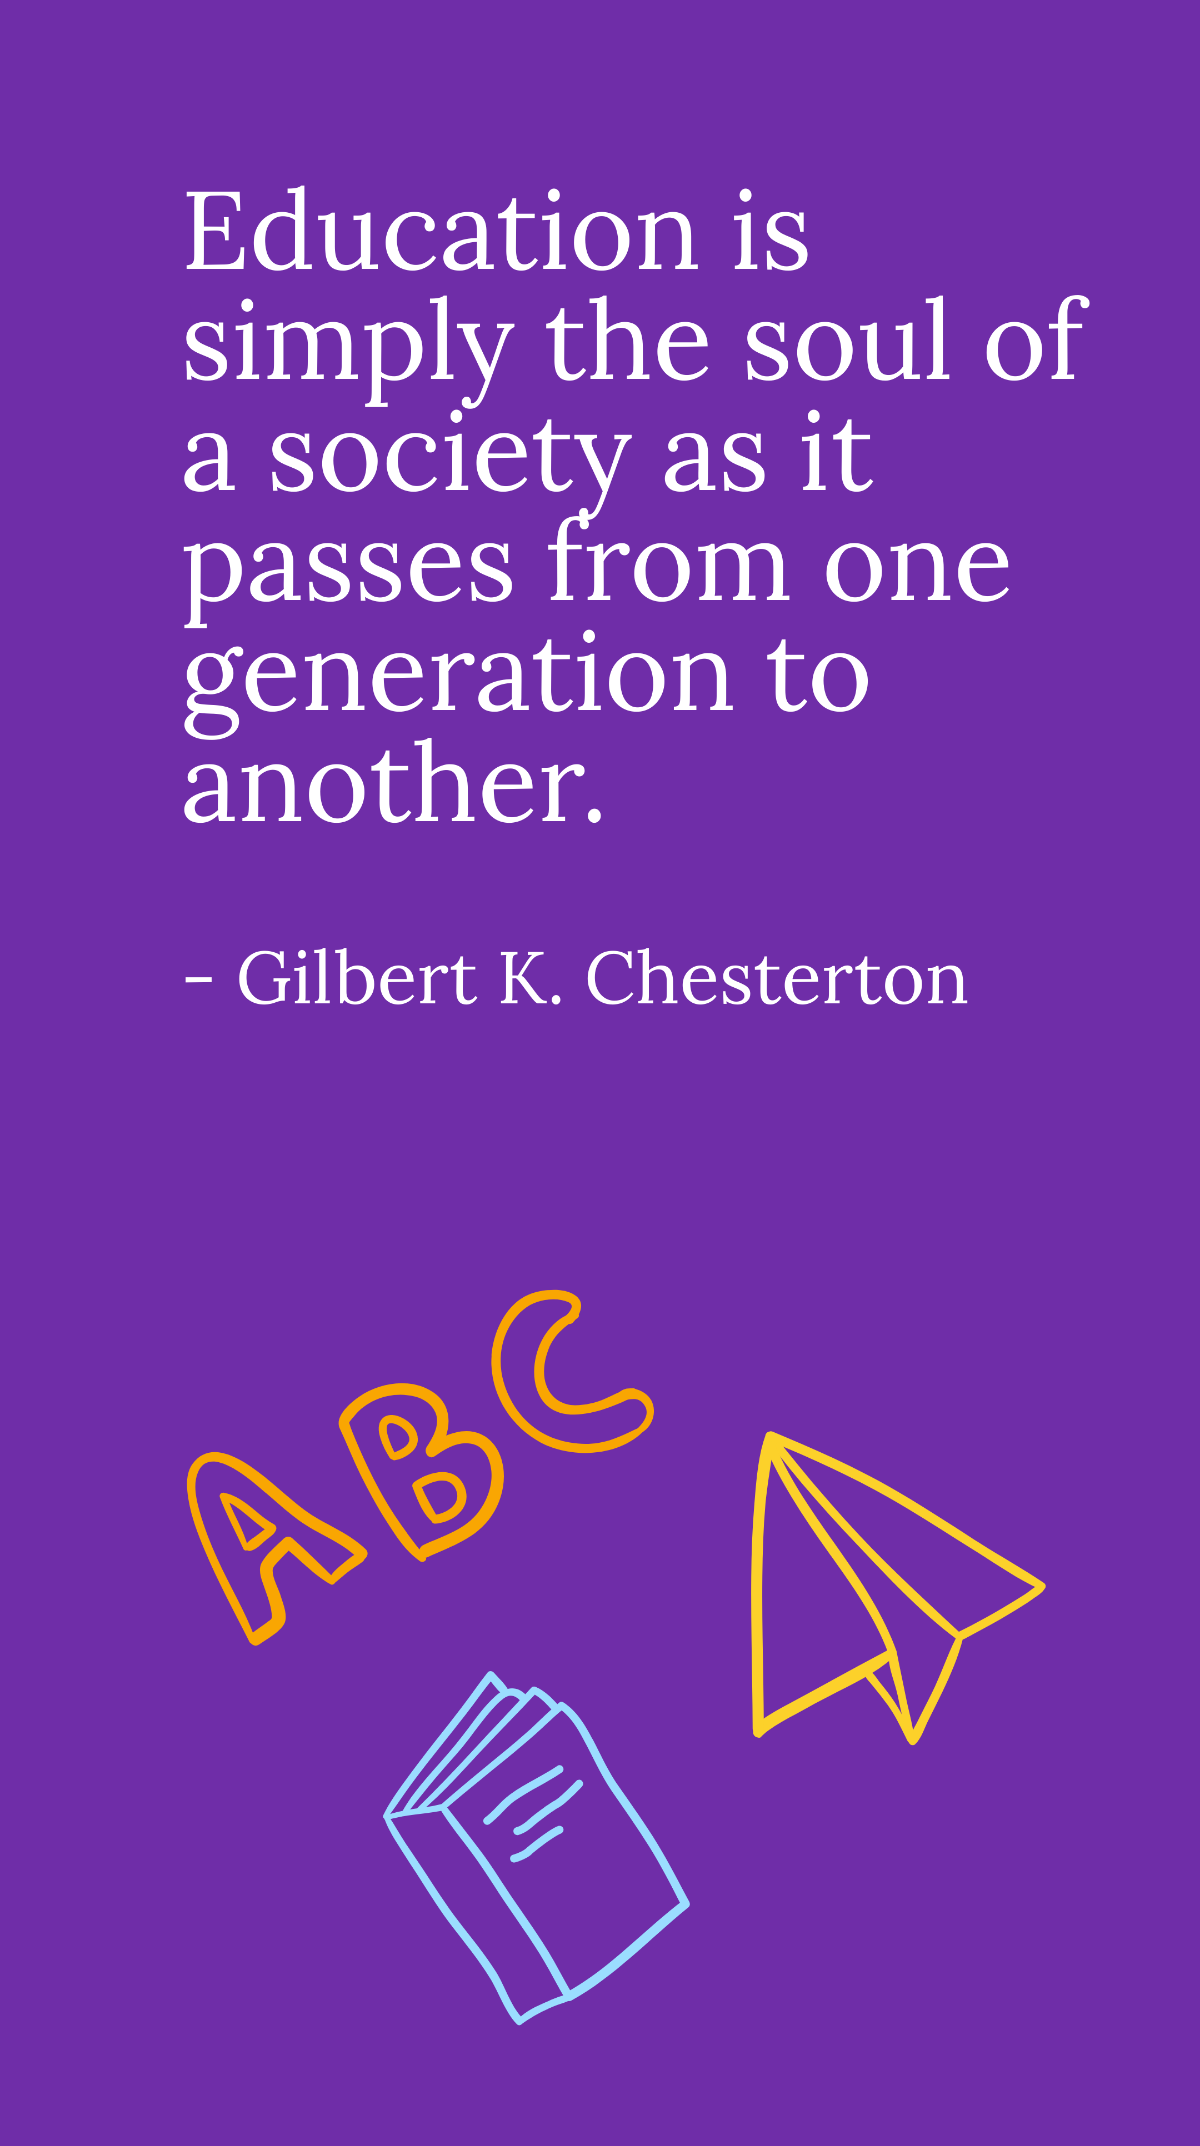 Gilbert K. Chesterton - Education is simply the soul of a society as it passes from one generation to another. Template